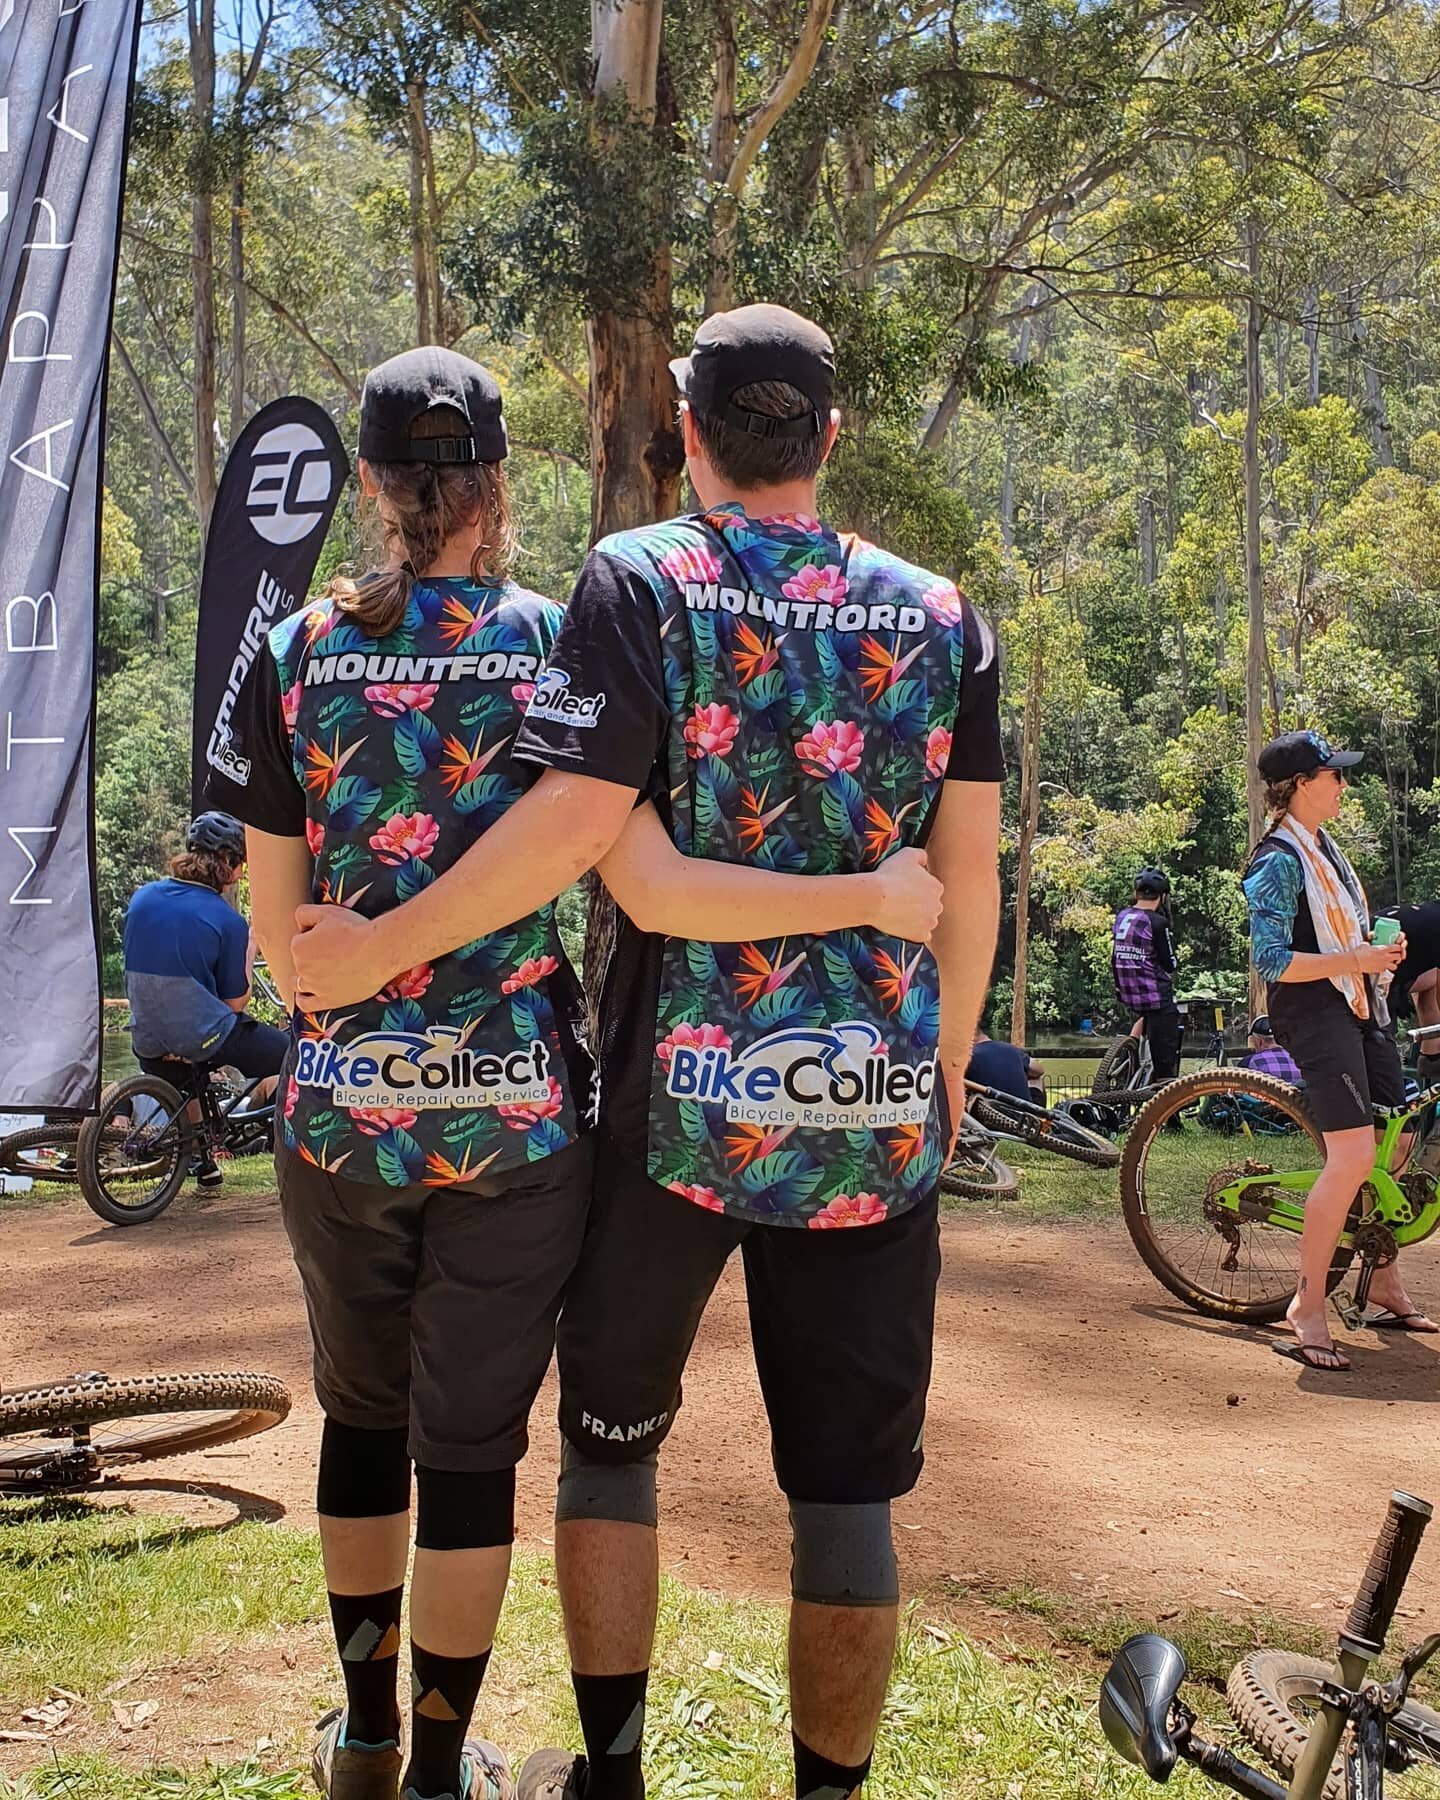 Cheaky buggers!!😂
.
.
We are #superstoked to have this #husbandandwife team #representing us. Their #passion for #mtb is #infectious and its #impossible to say no when they invite you out for a #ride
.
.
@justin.mountford and @emily_mountford are th